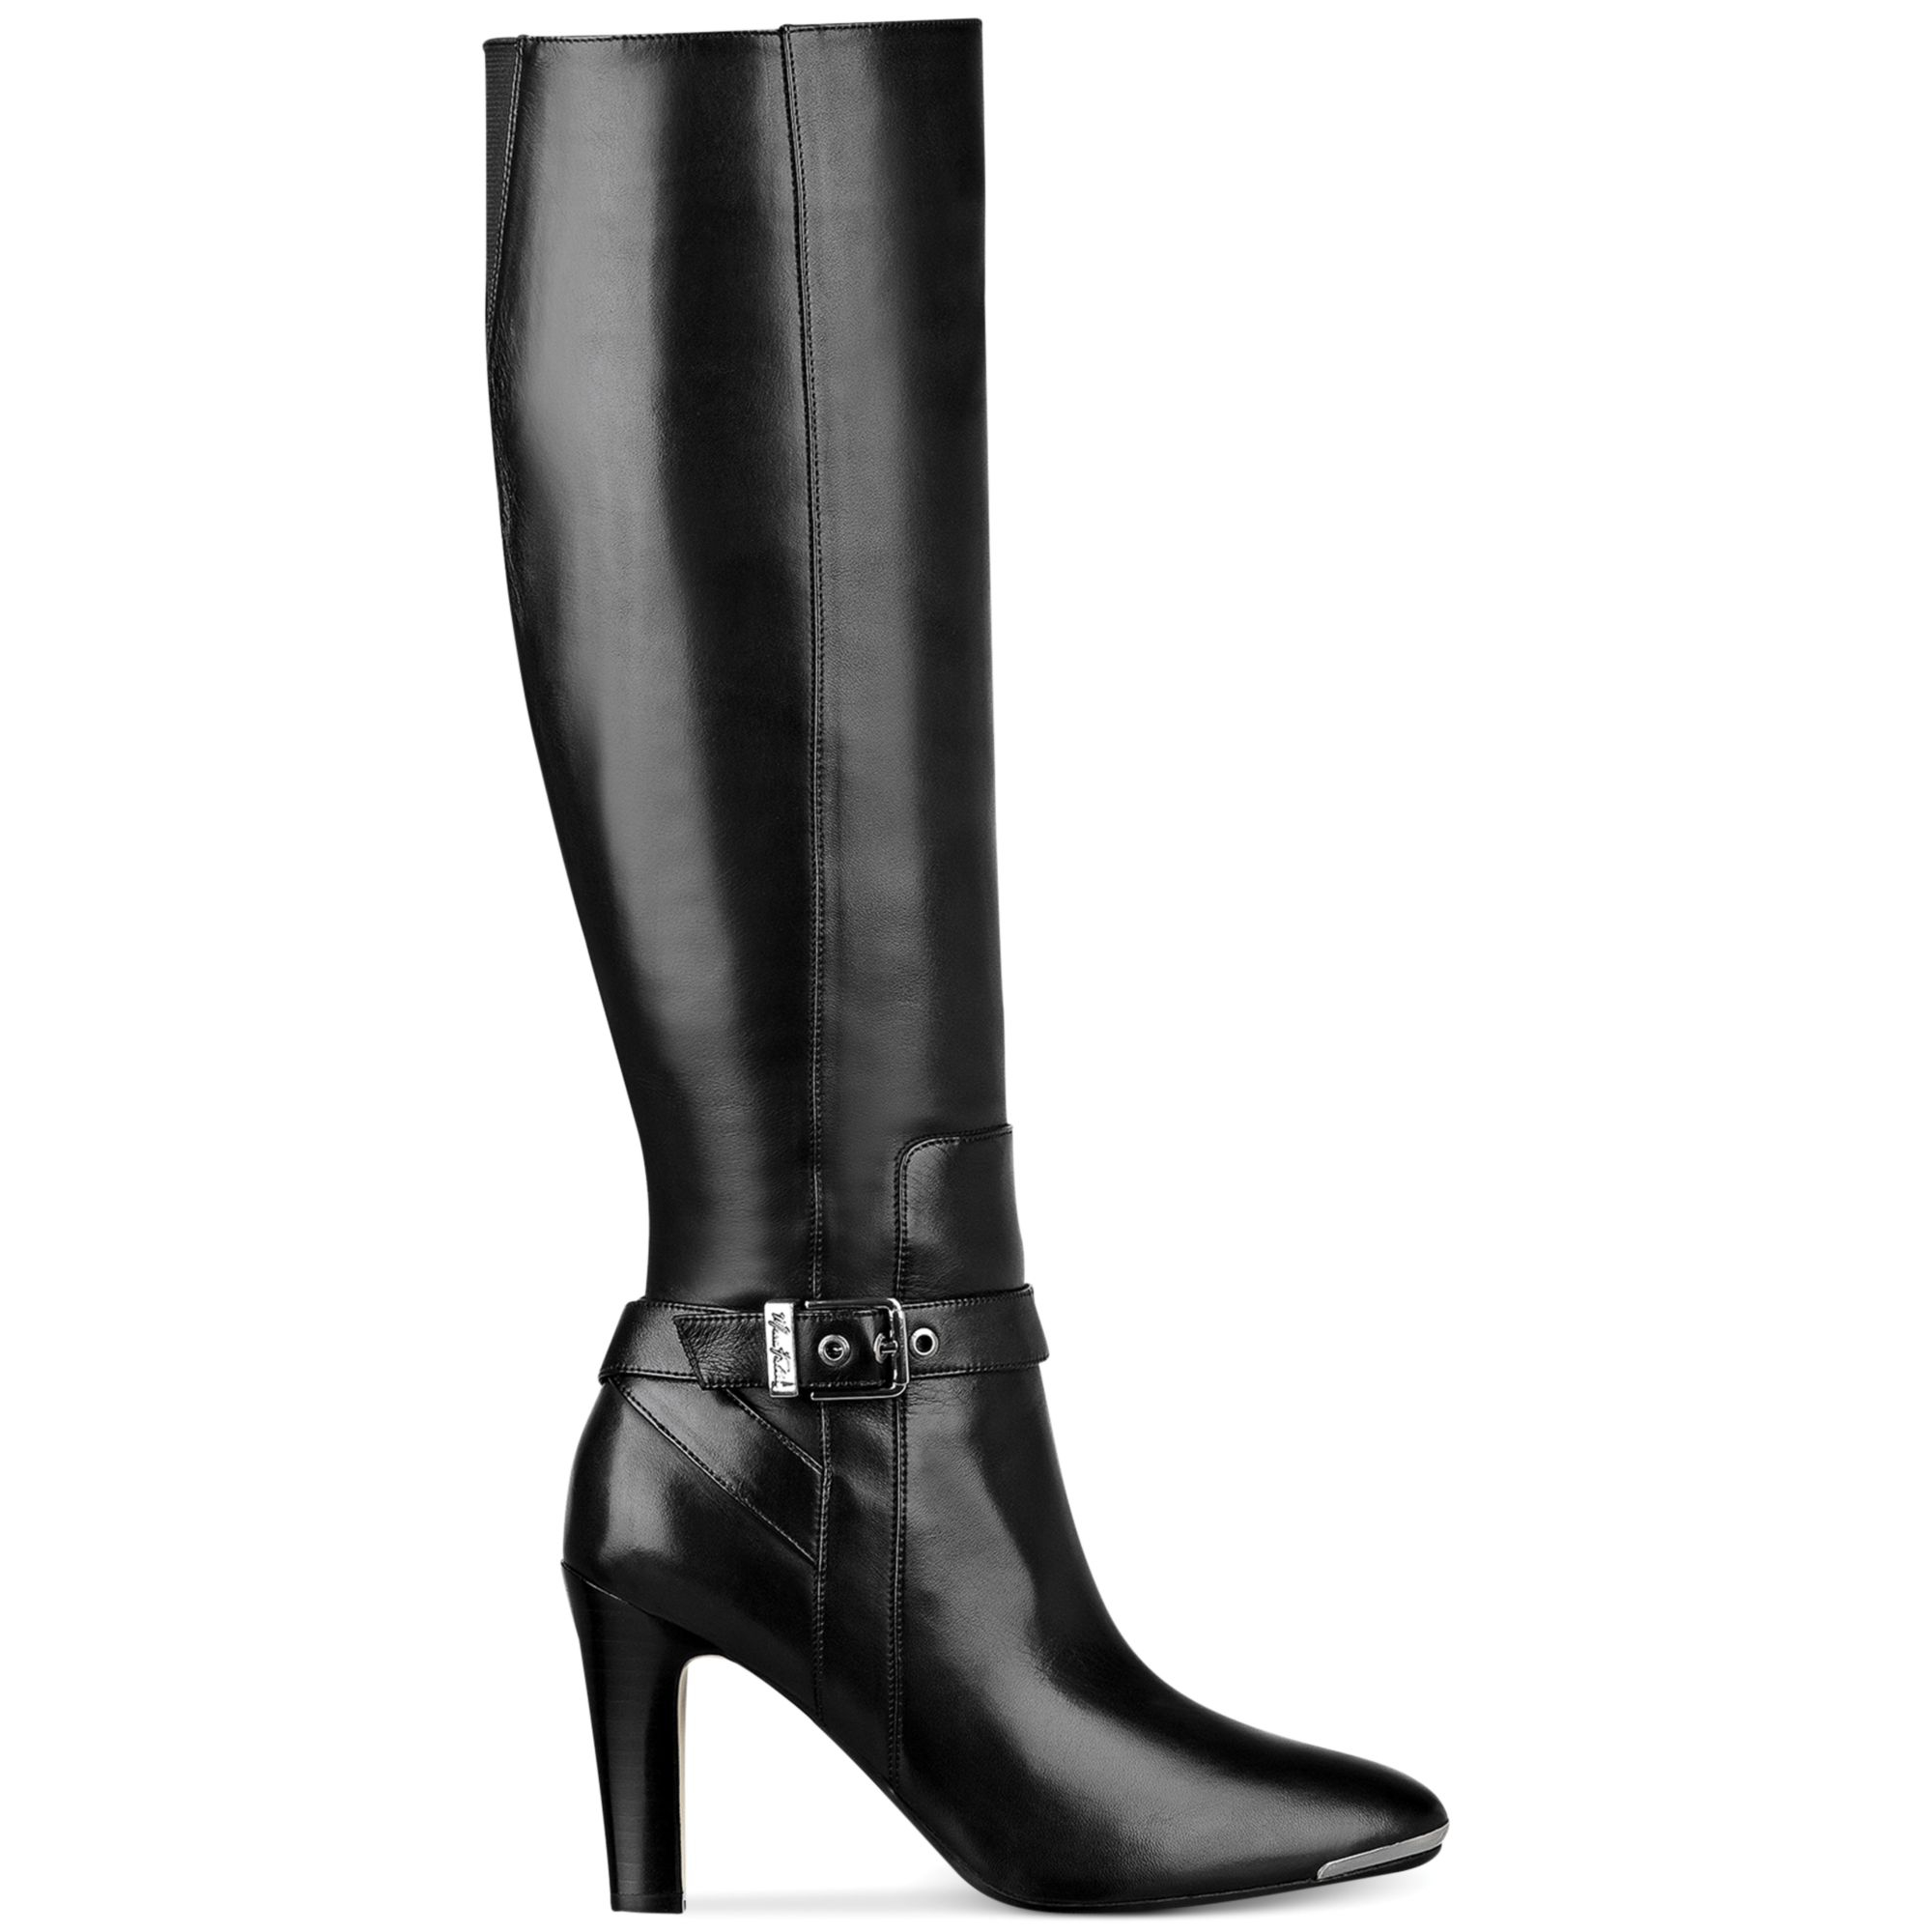 Marc fisher Ibis Tall Wide Calf Dress Boots in Black (Black Leather) | Lyst